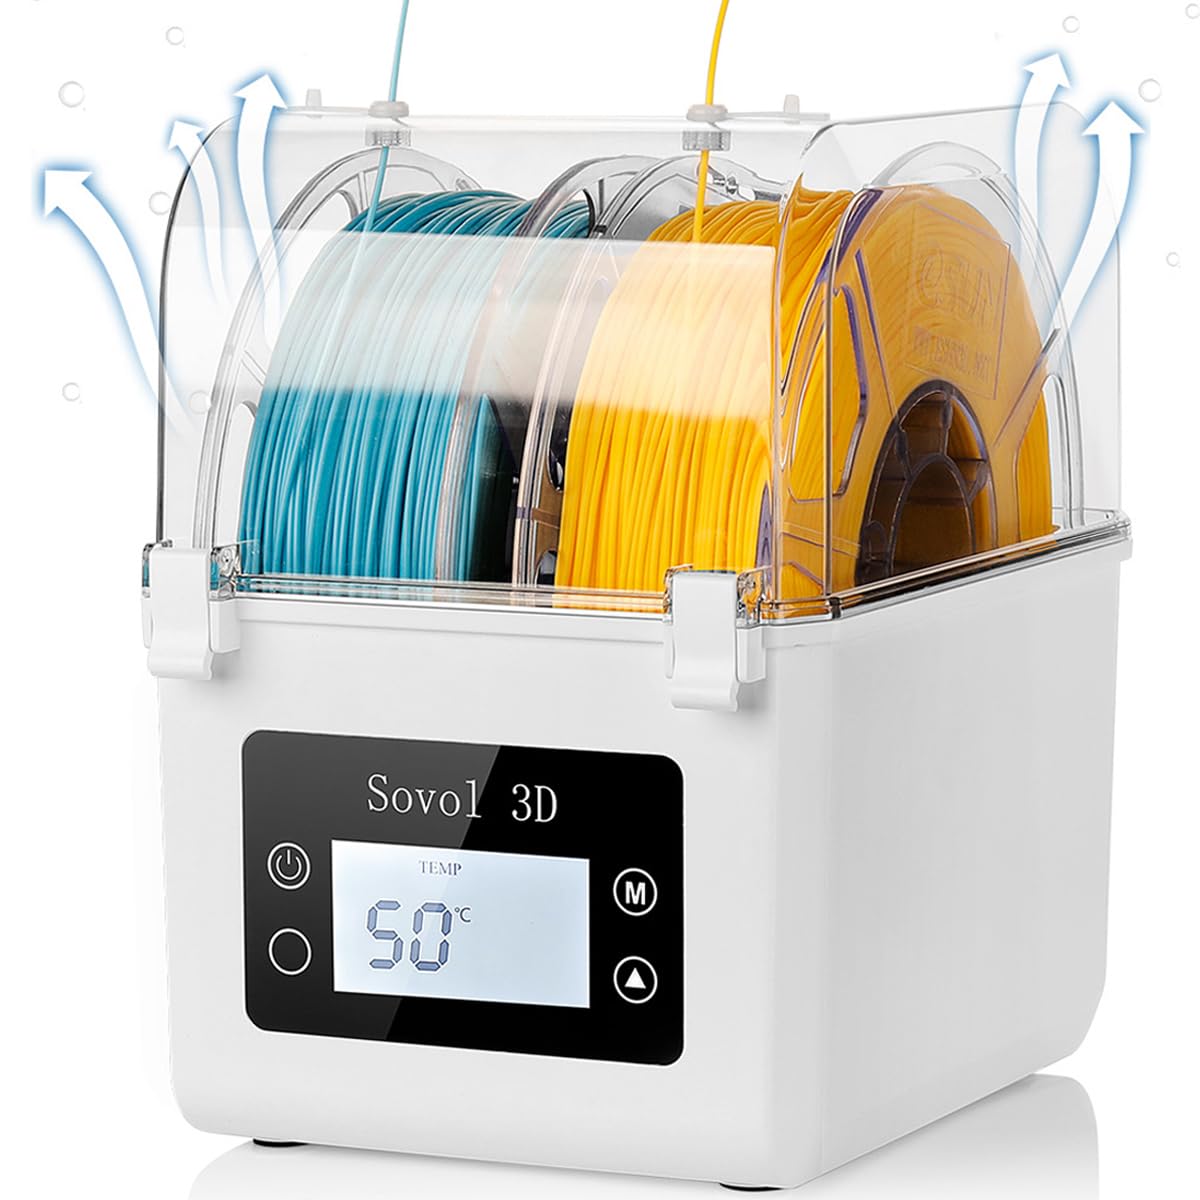 Dead - Sovol Double Filament Dryer $39.64, free ship with prime